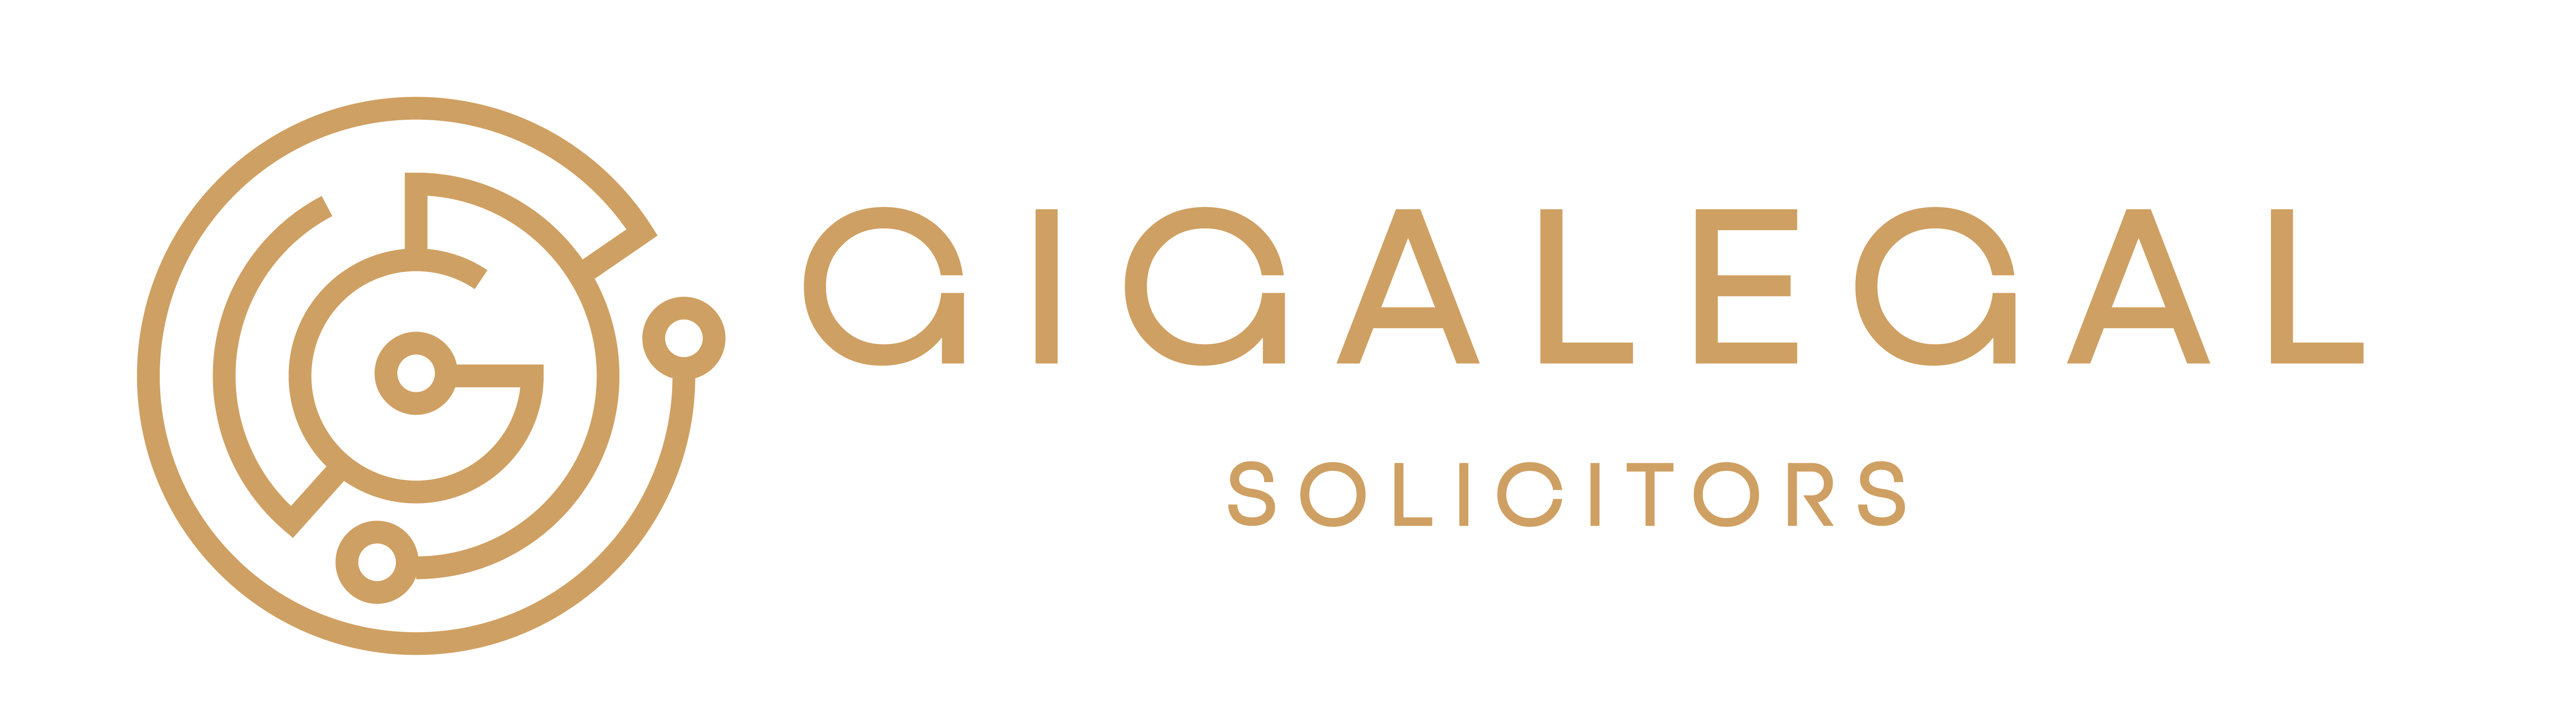 GigaLegal Solicitors | Best Solicitors